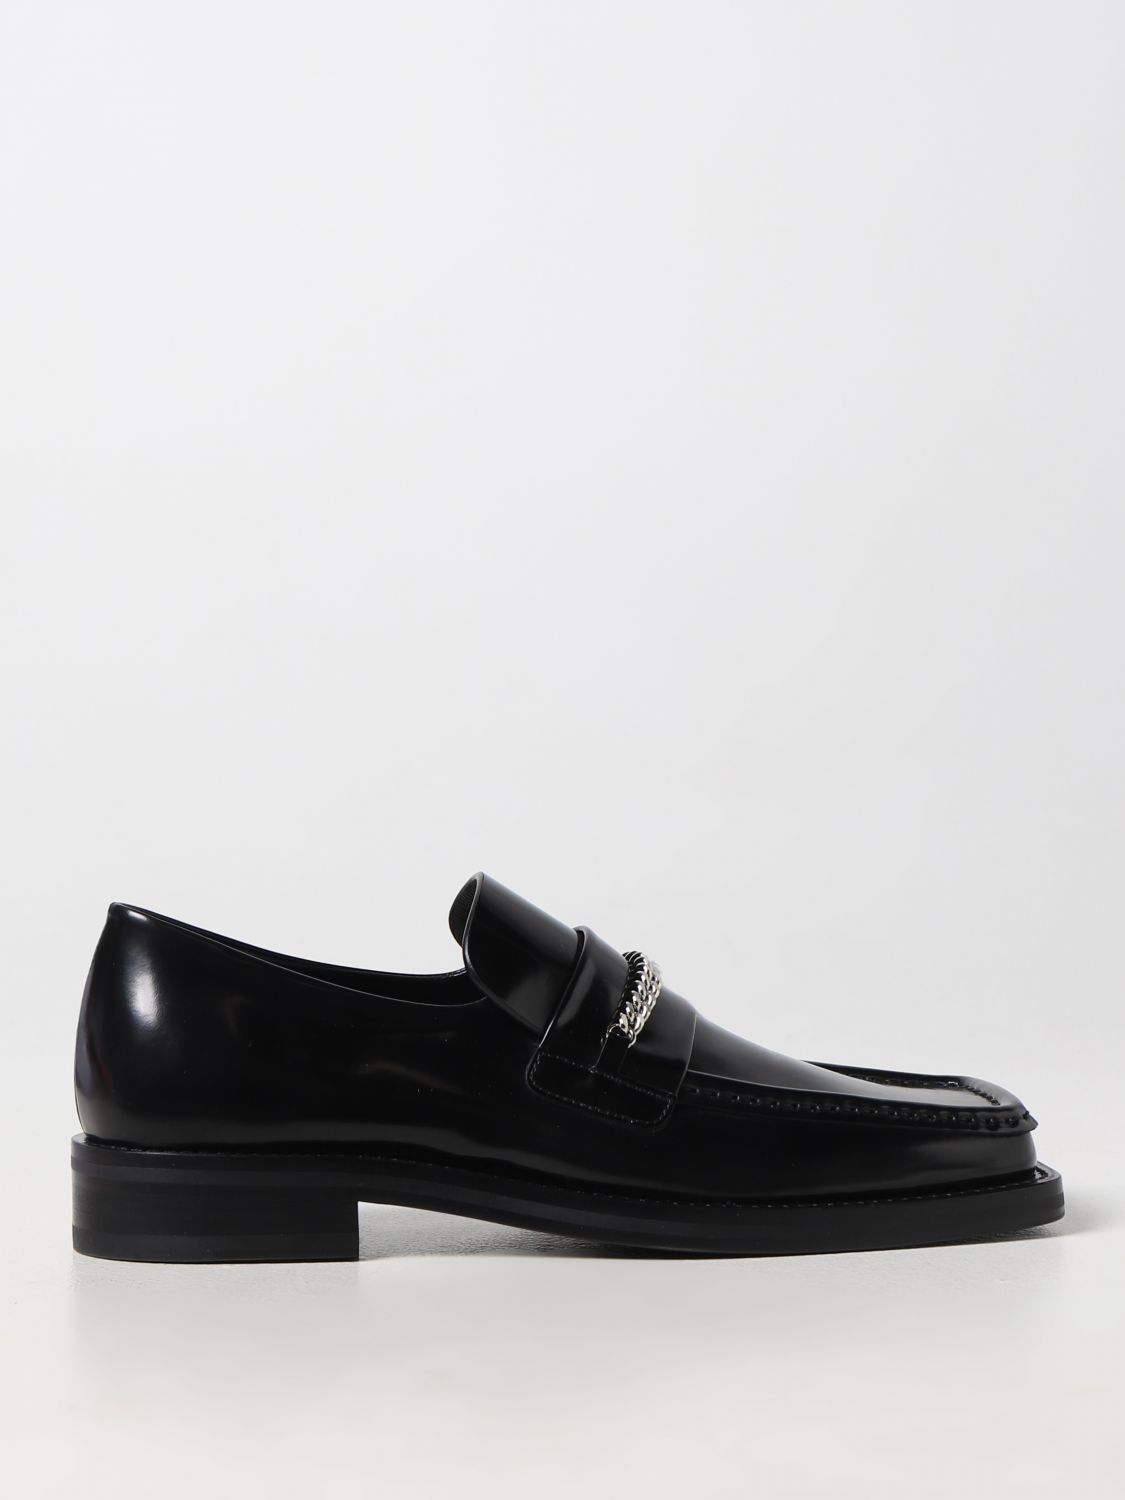 Martine Rose Chain Leather Loafers In Black | ModeSens